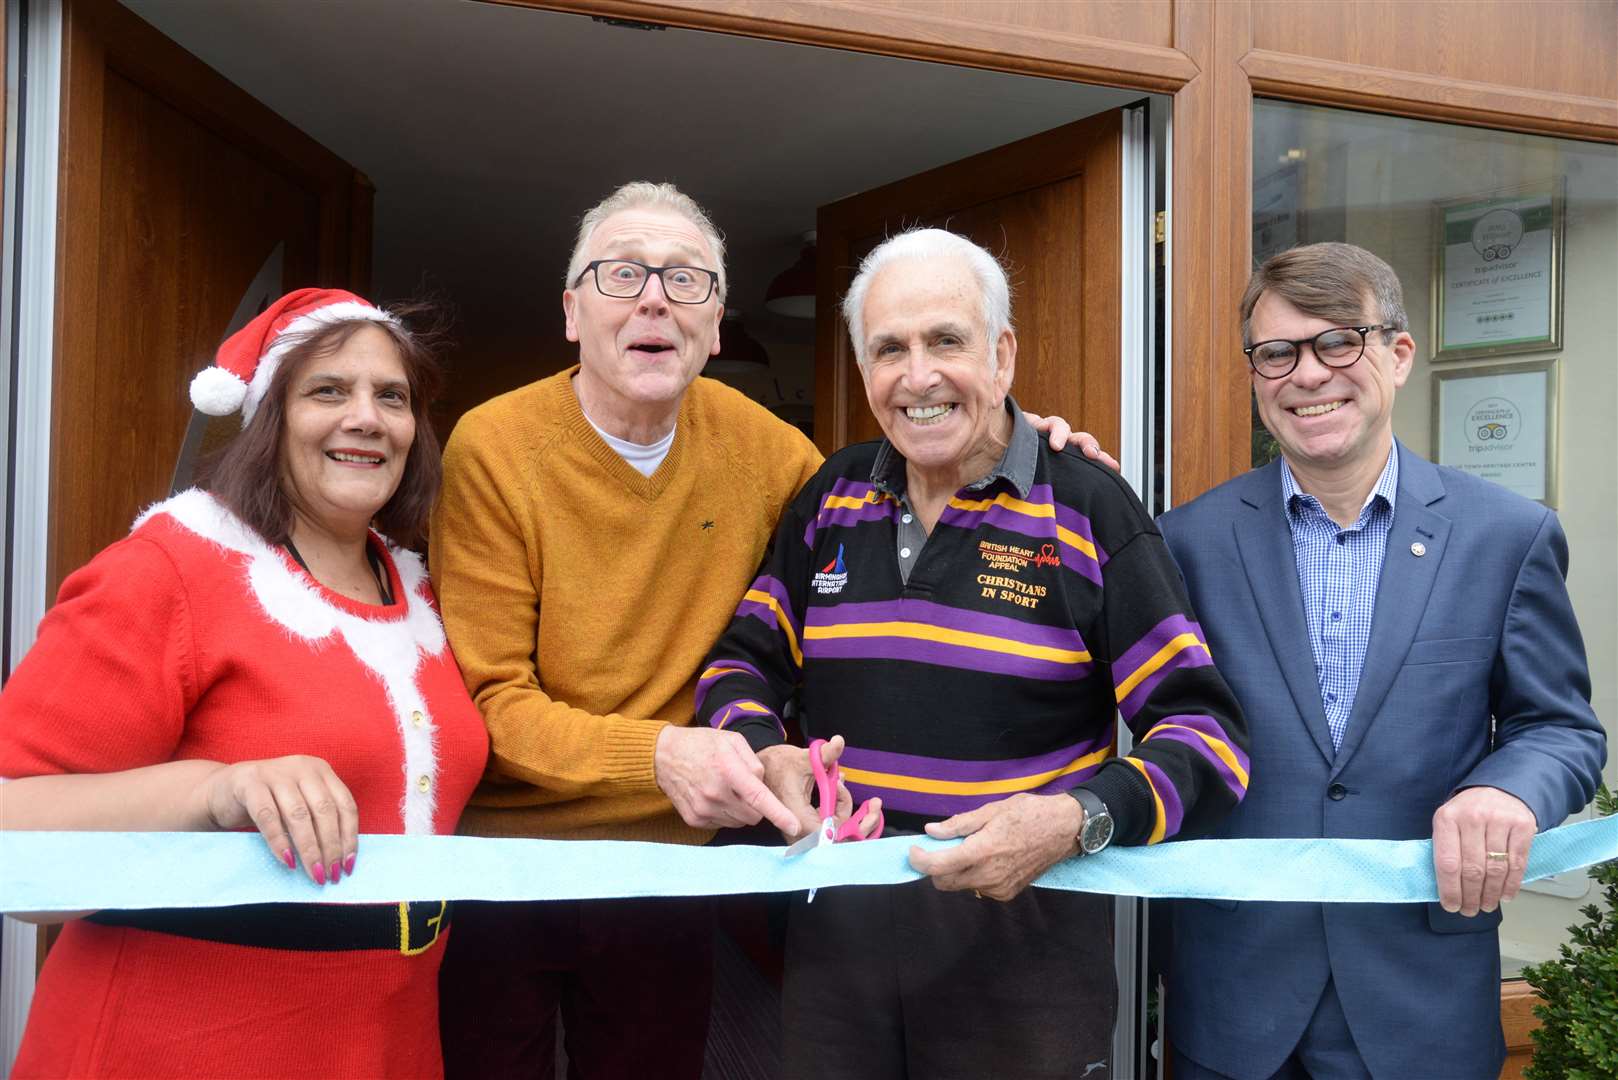 Owner Jenny Hurkett, retiring comic Paul Harris, former Crackerjack comic Don Maclean and show director Dean Caston celebrate the opening of new doors at the Criterion Theatre, Blue Town, Sheerness on Tuesday. Picture: Chris Davey. (23910327)